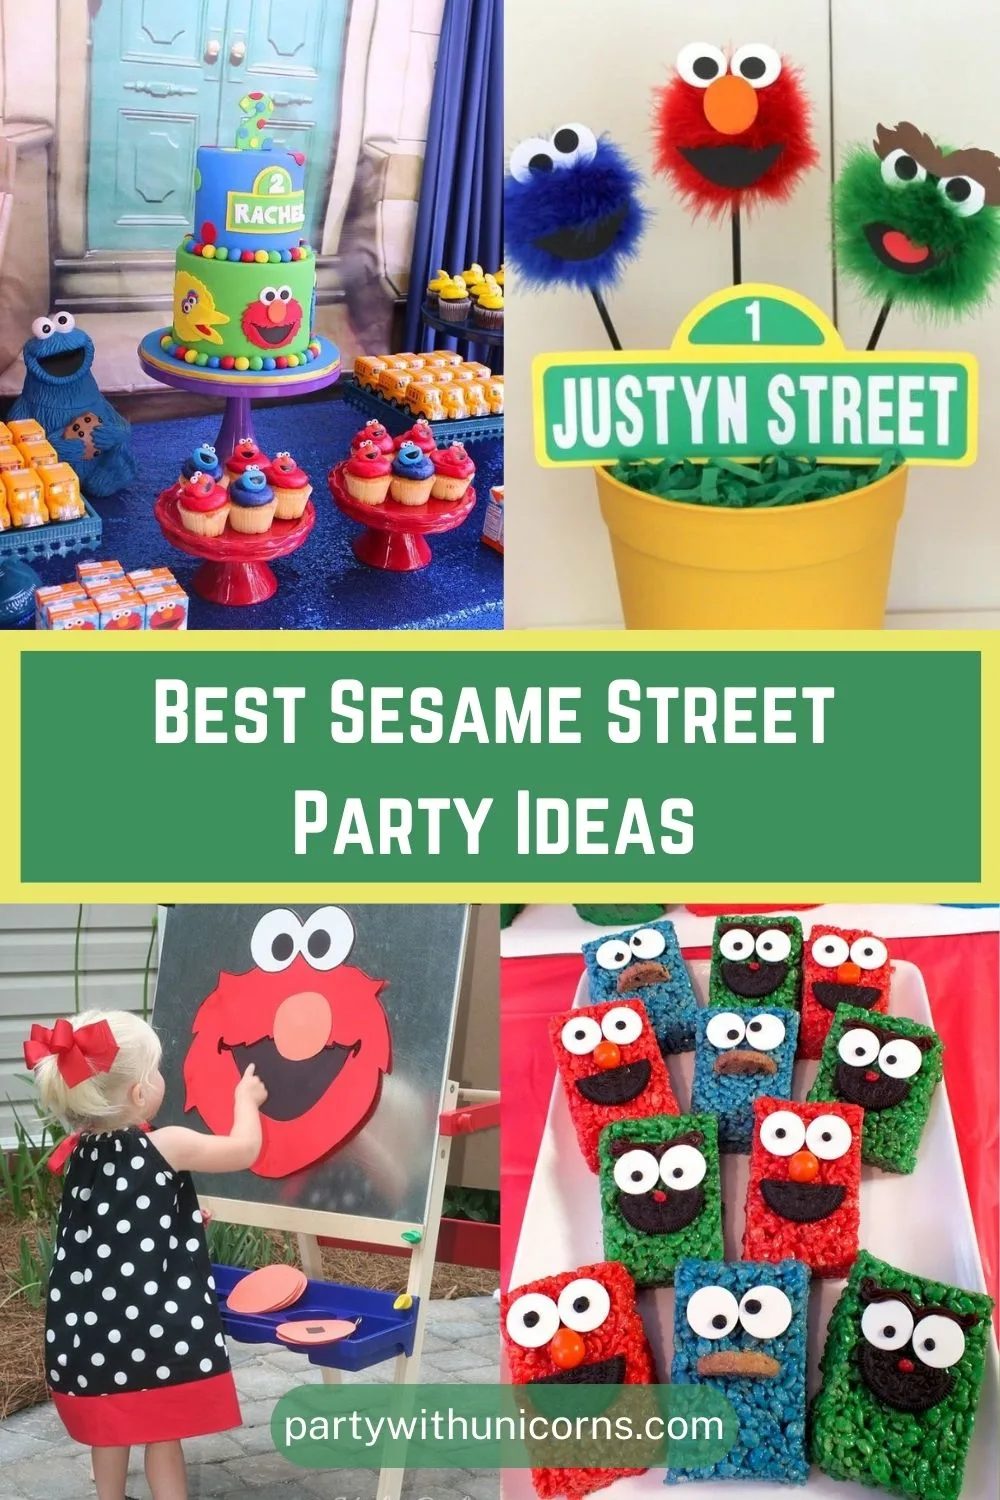 42 Best Sesame Street Party Ideas - Party with Unicorns